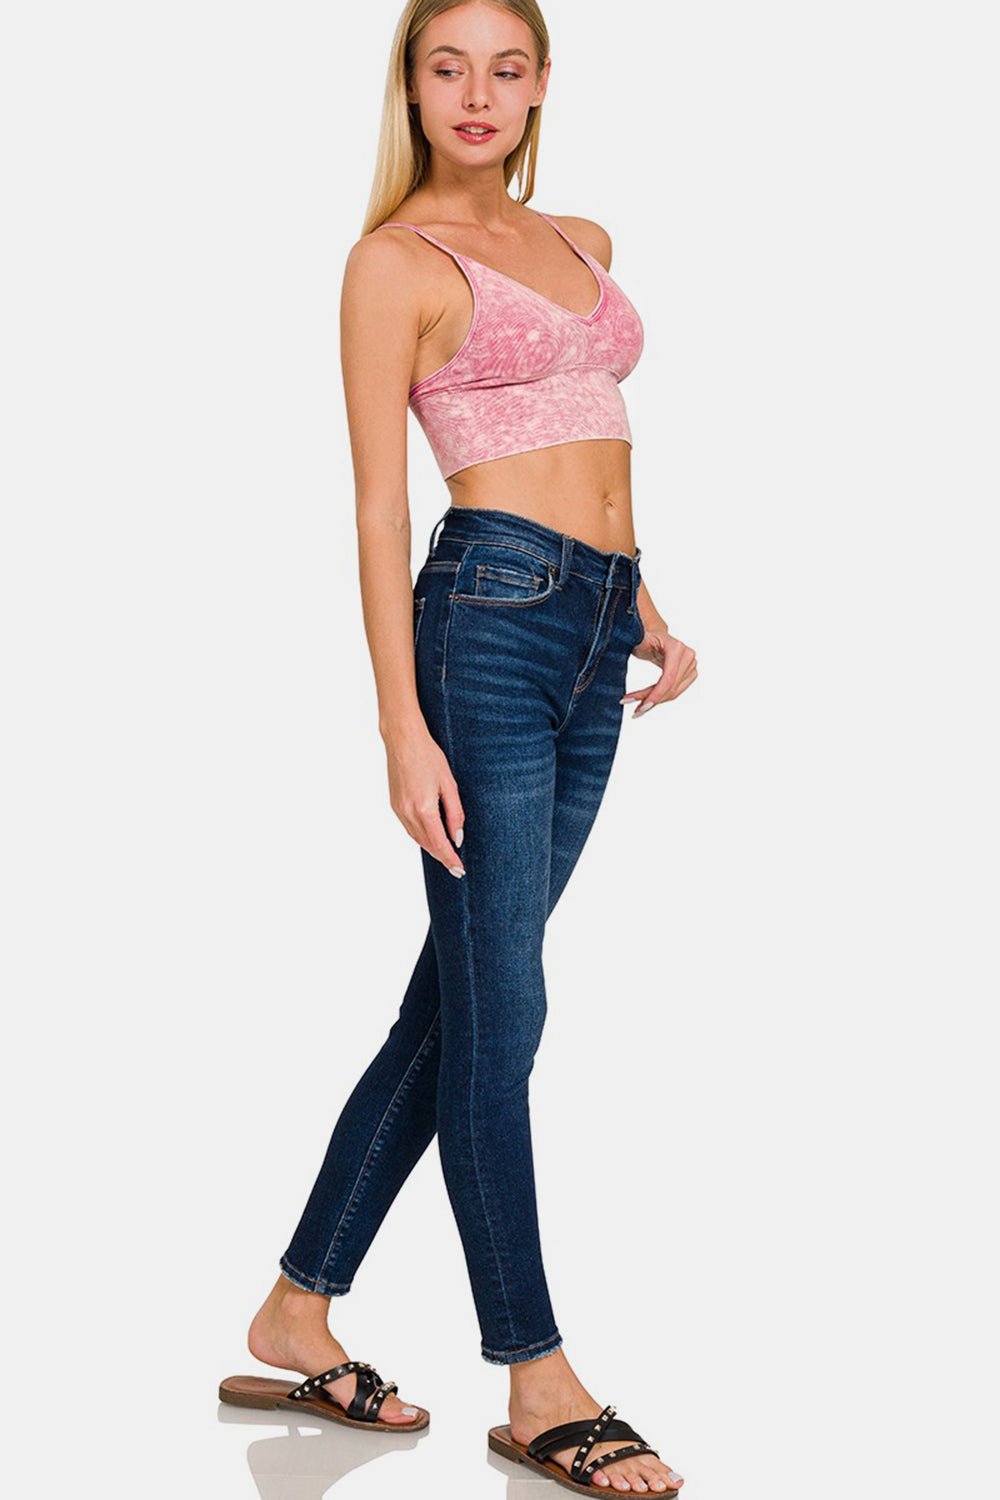 Washed Ribbed Cropped Cami in Ash PinkCamisoleZenana